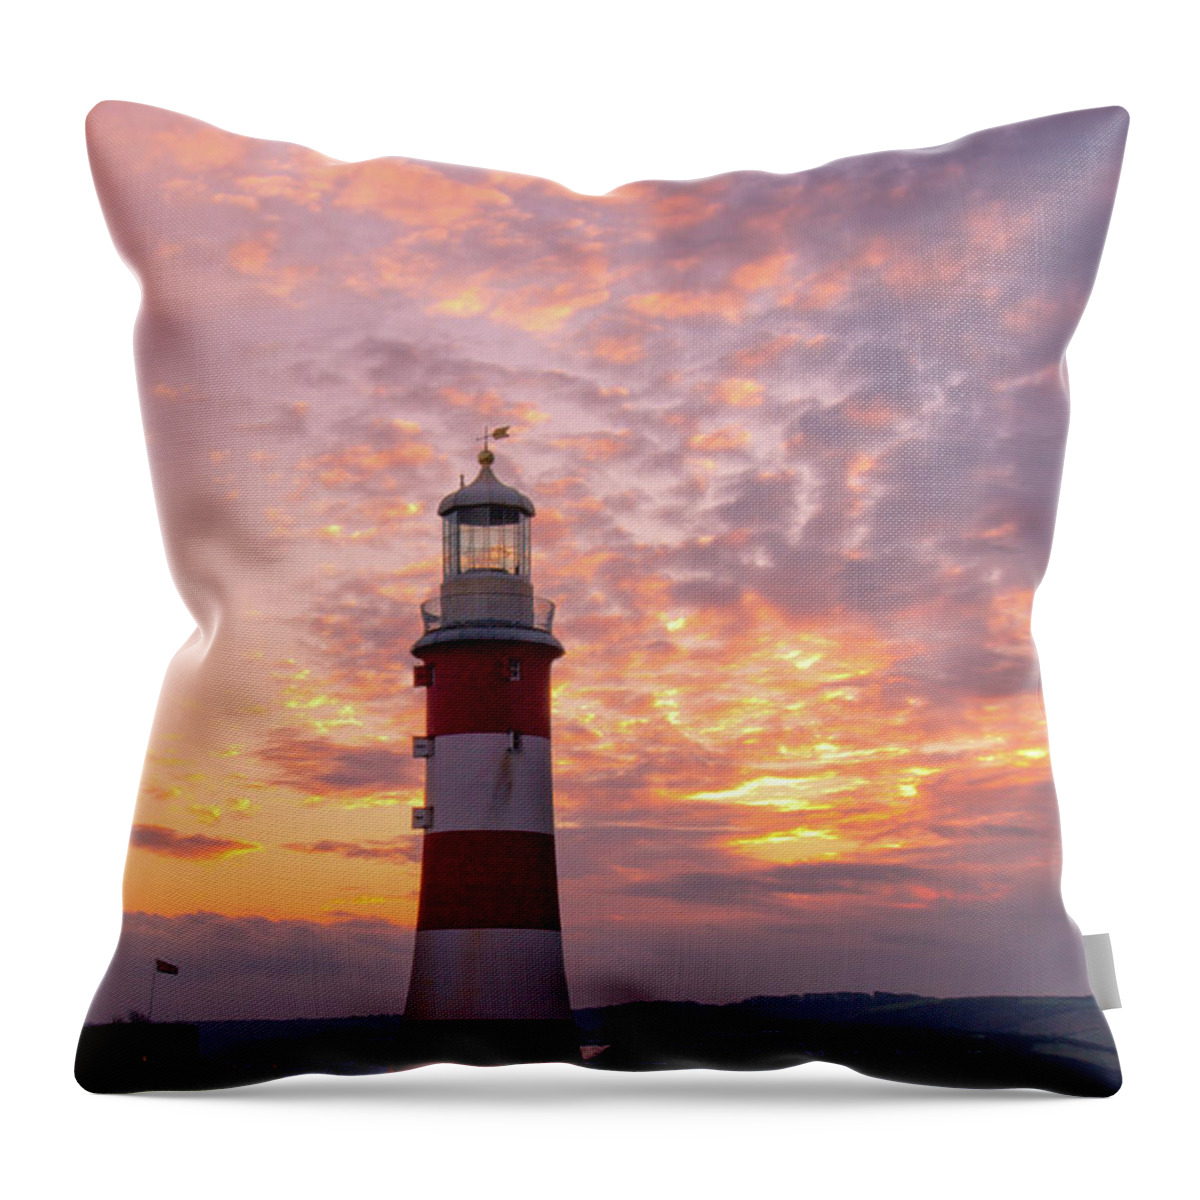 Tranquility Throw Pillow featuring the photograph Smeatons Tower Winter Sunrise by Alan Lomax Photography.